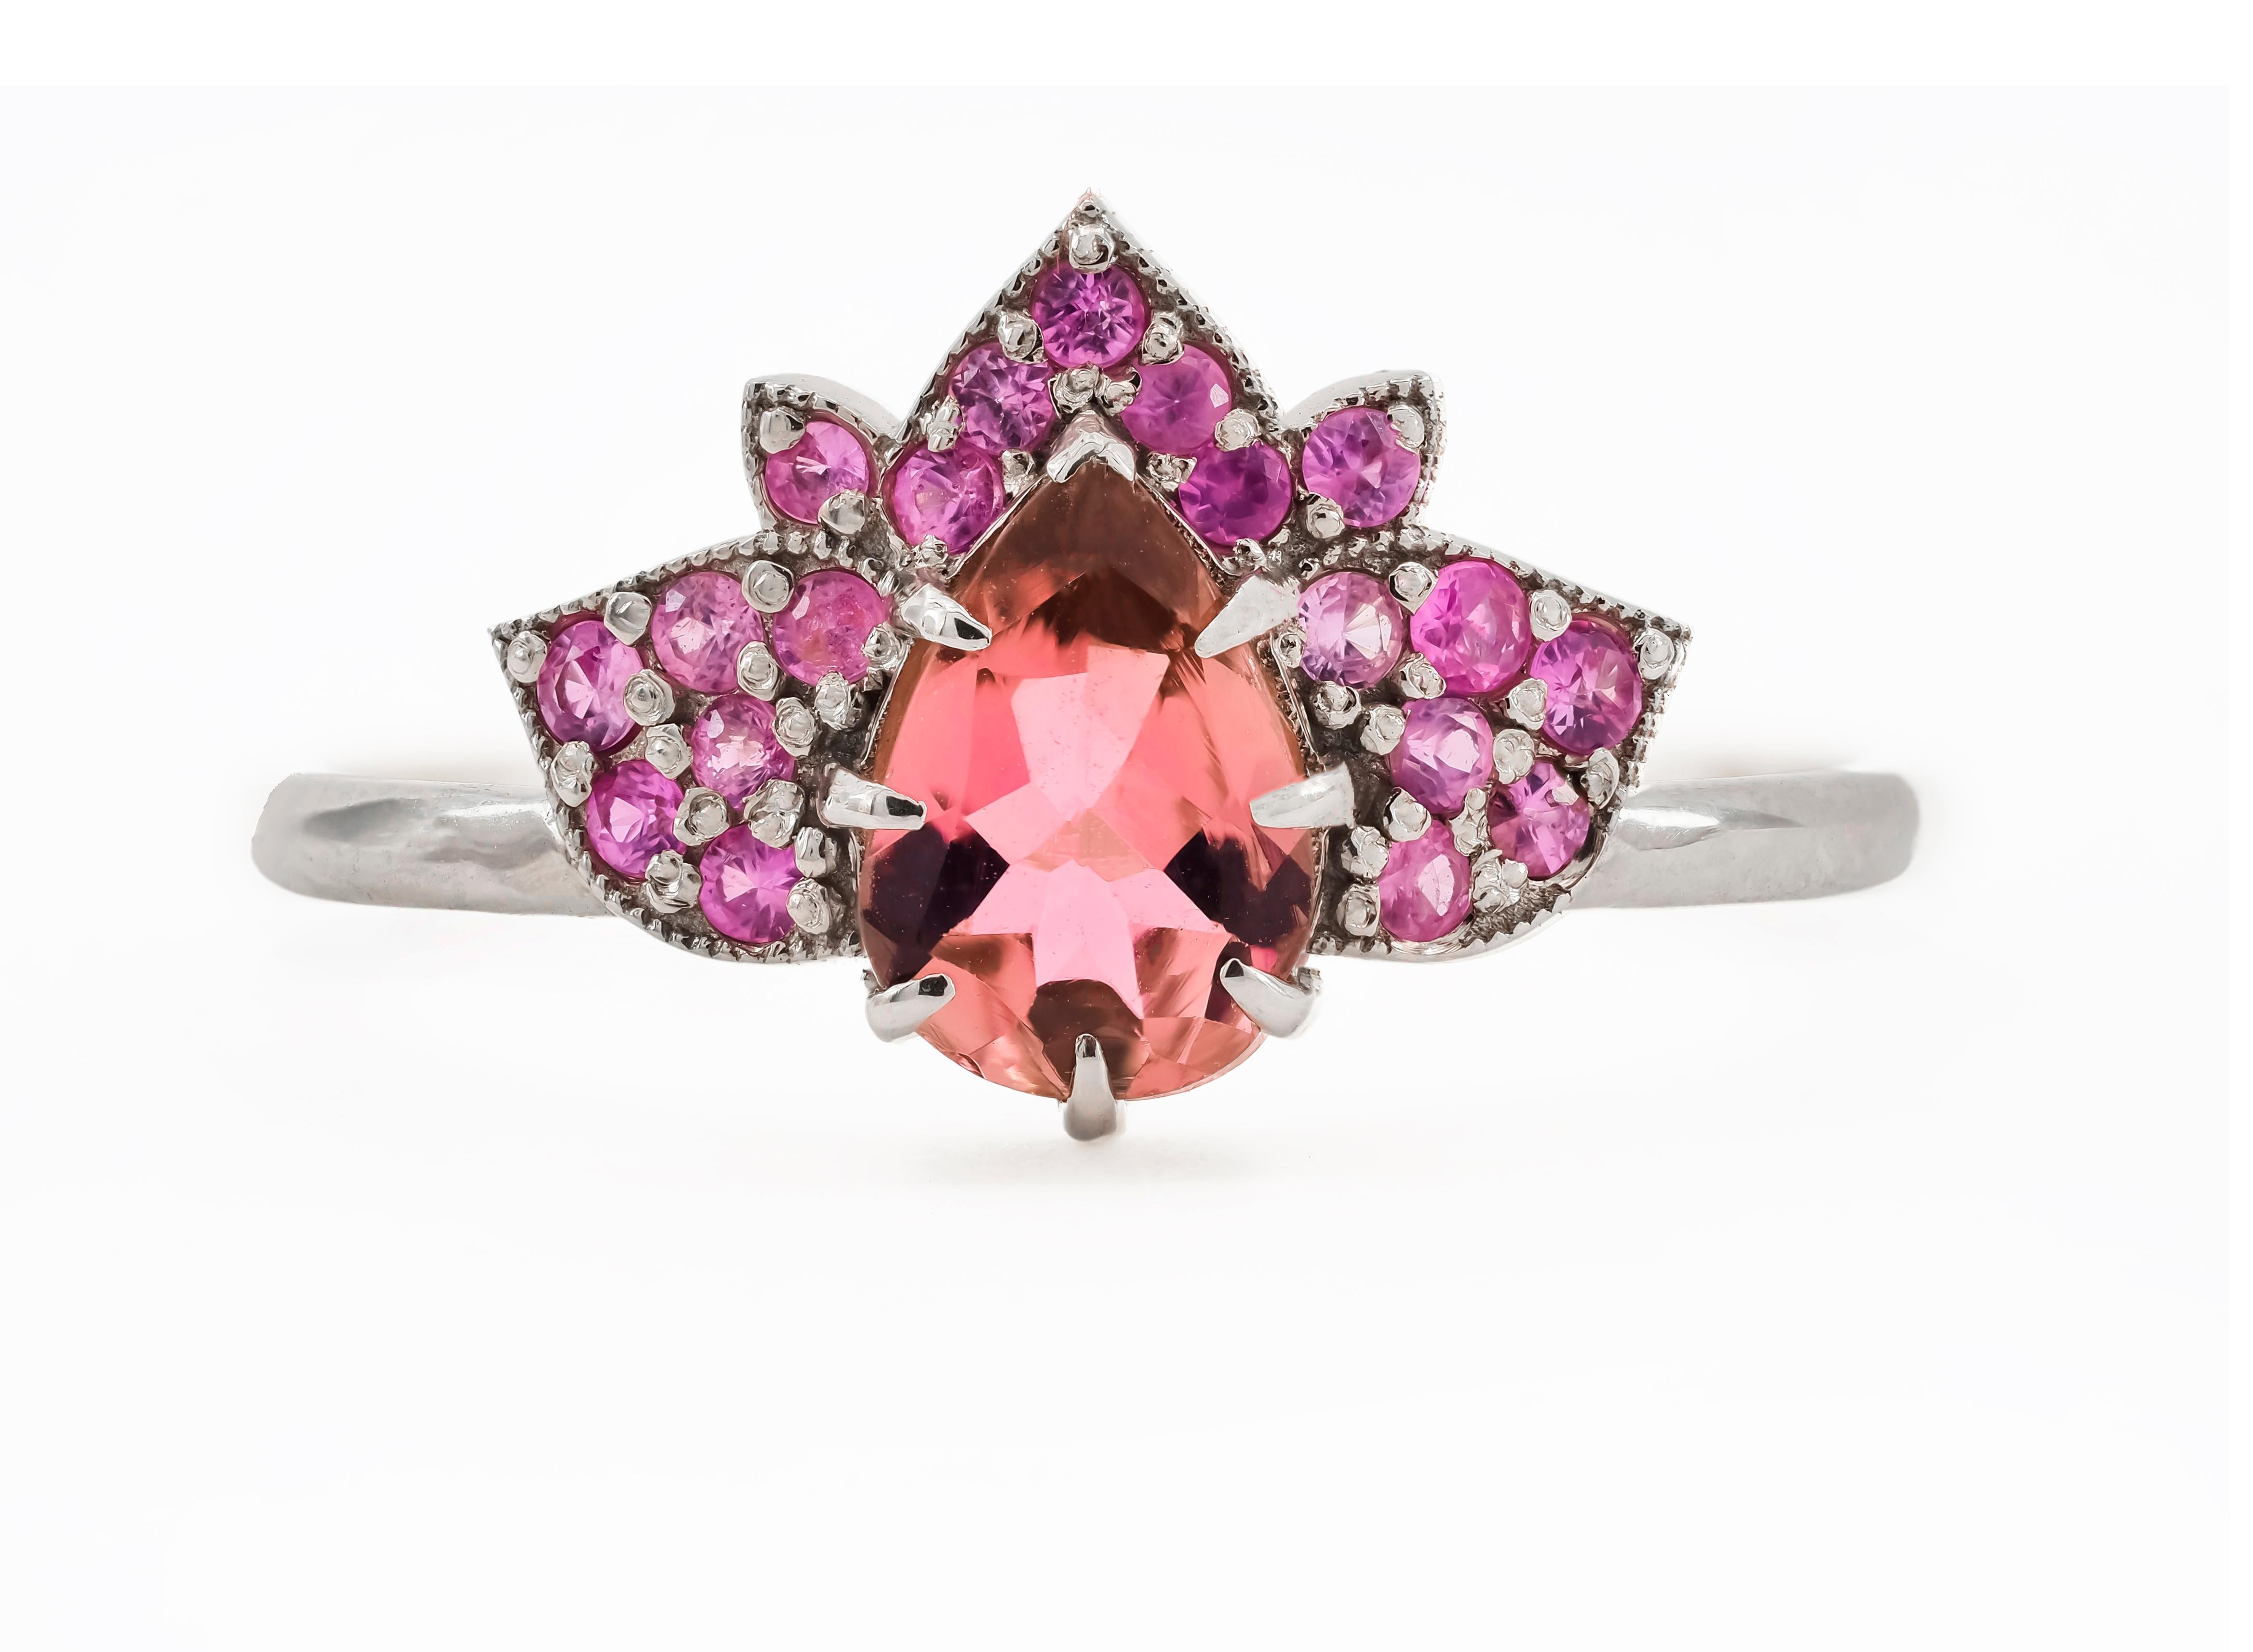 For Sale:  14 karat gold Lotus ring with pink tourmaline and sapphires 9